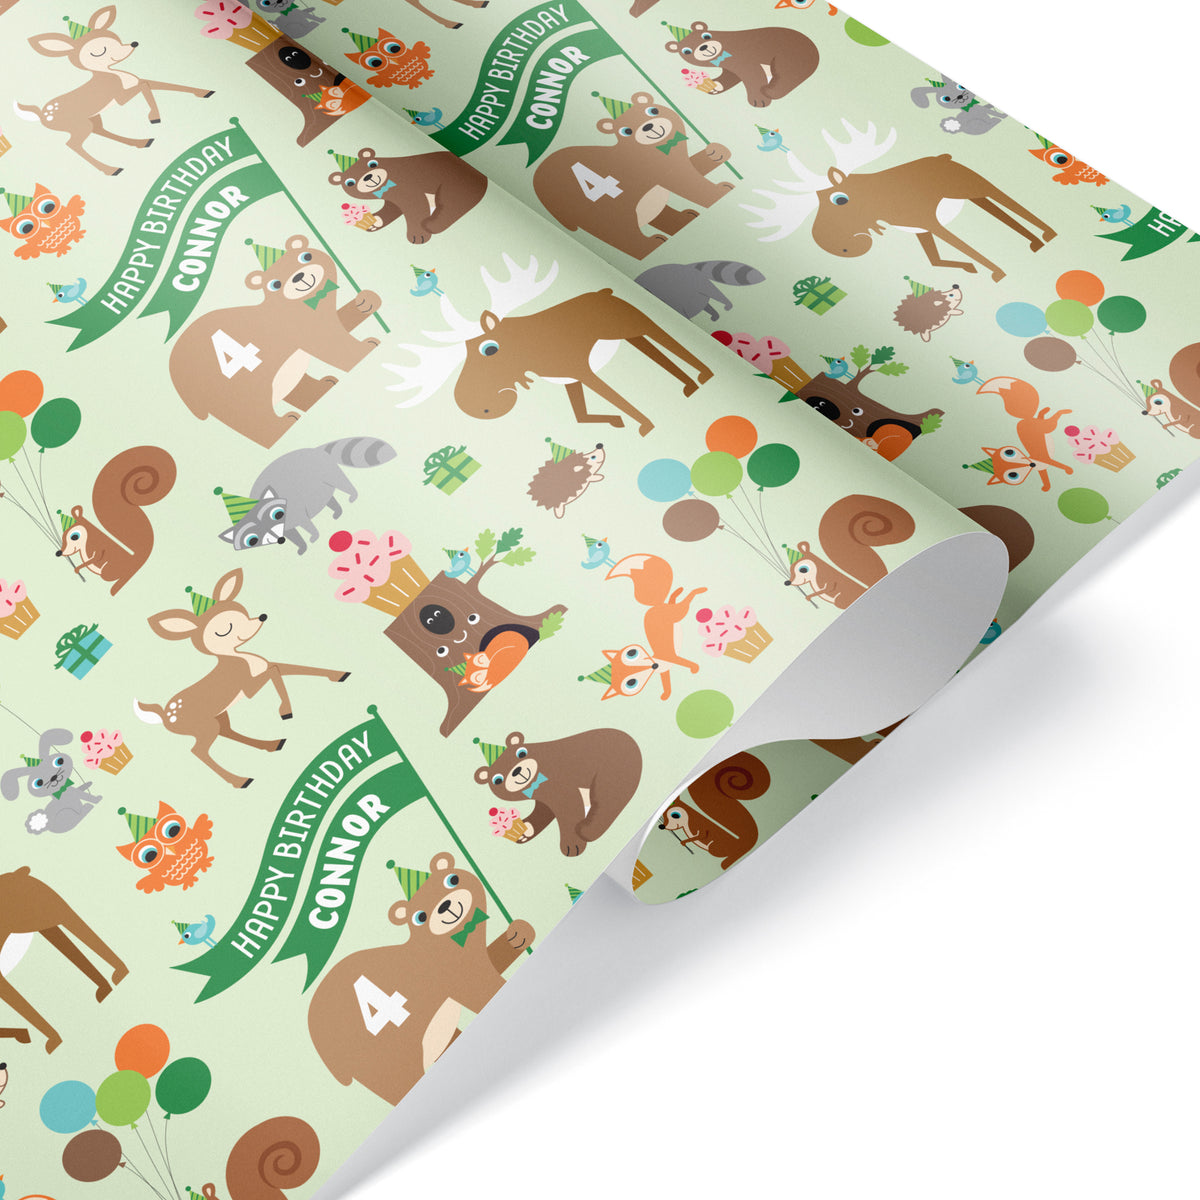 Woodland Animal Party Birthday Personalized Wrapping Paper - GREEN